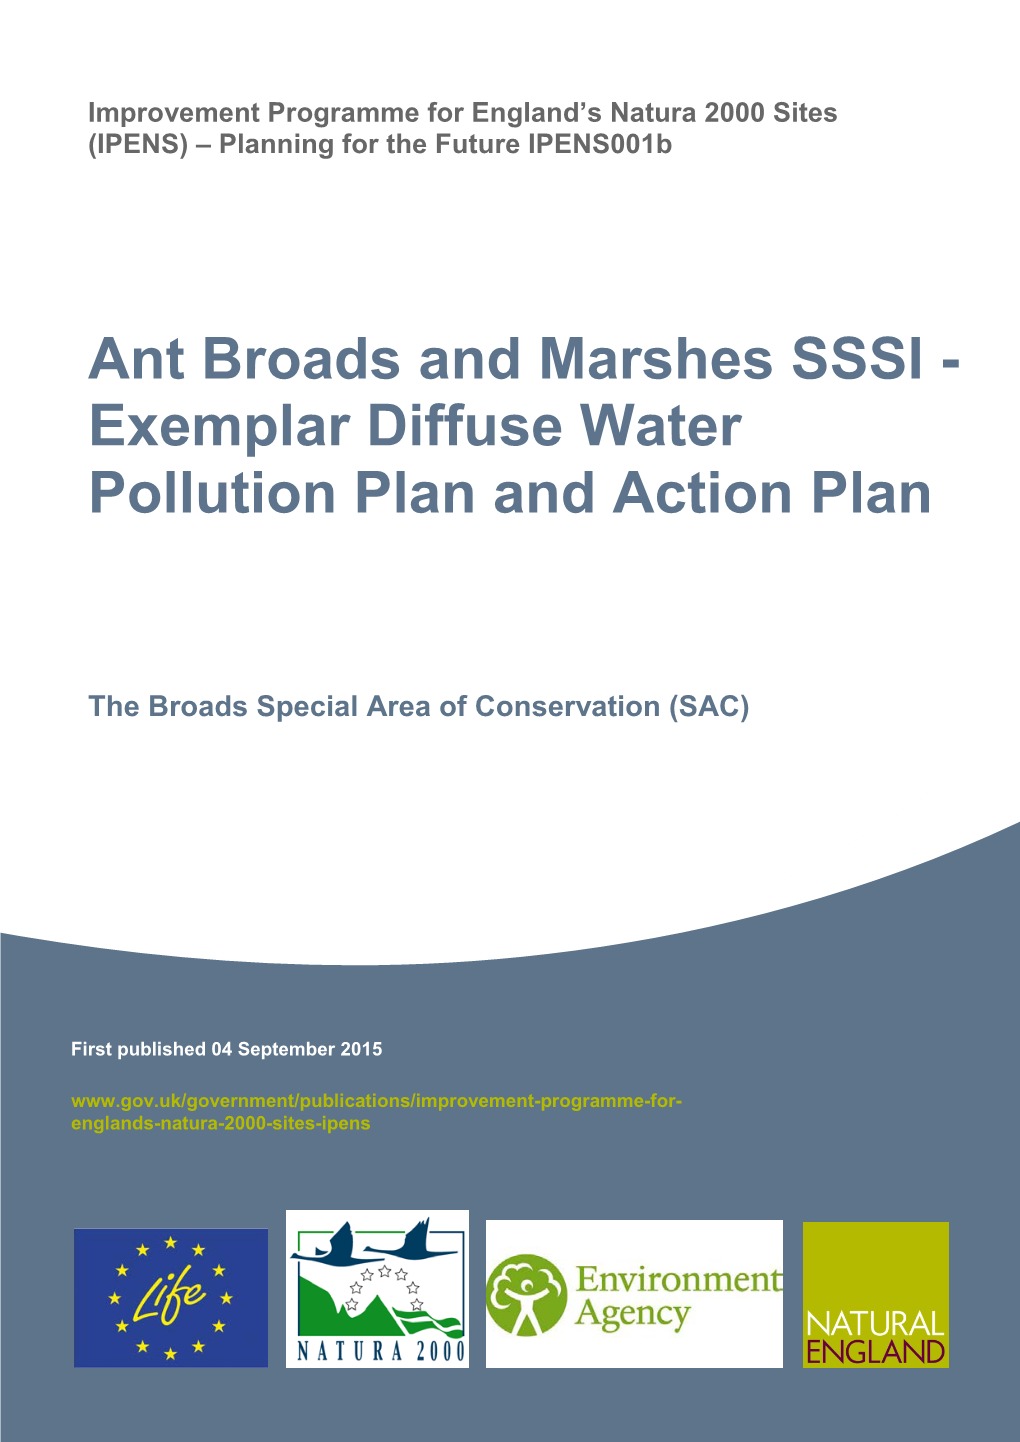 Ant Broads and Marshes SSSI - Exemplar Diffuse Water Pollution Plan and Action Plan